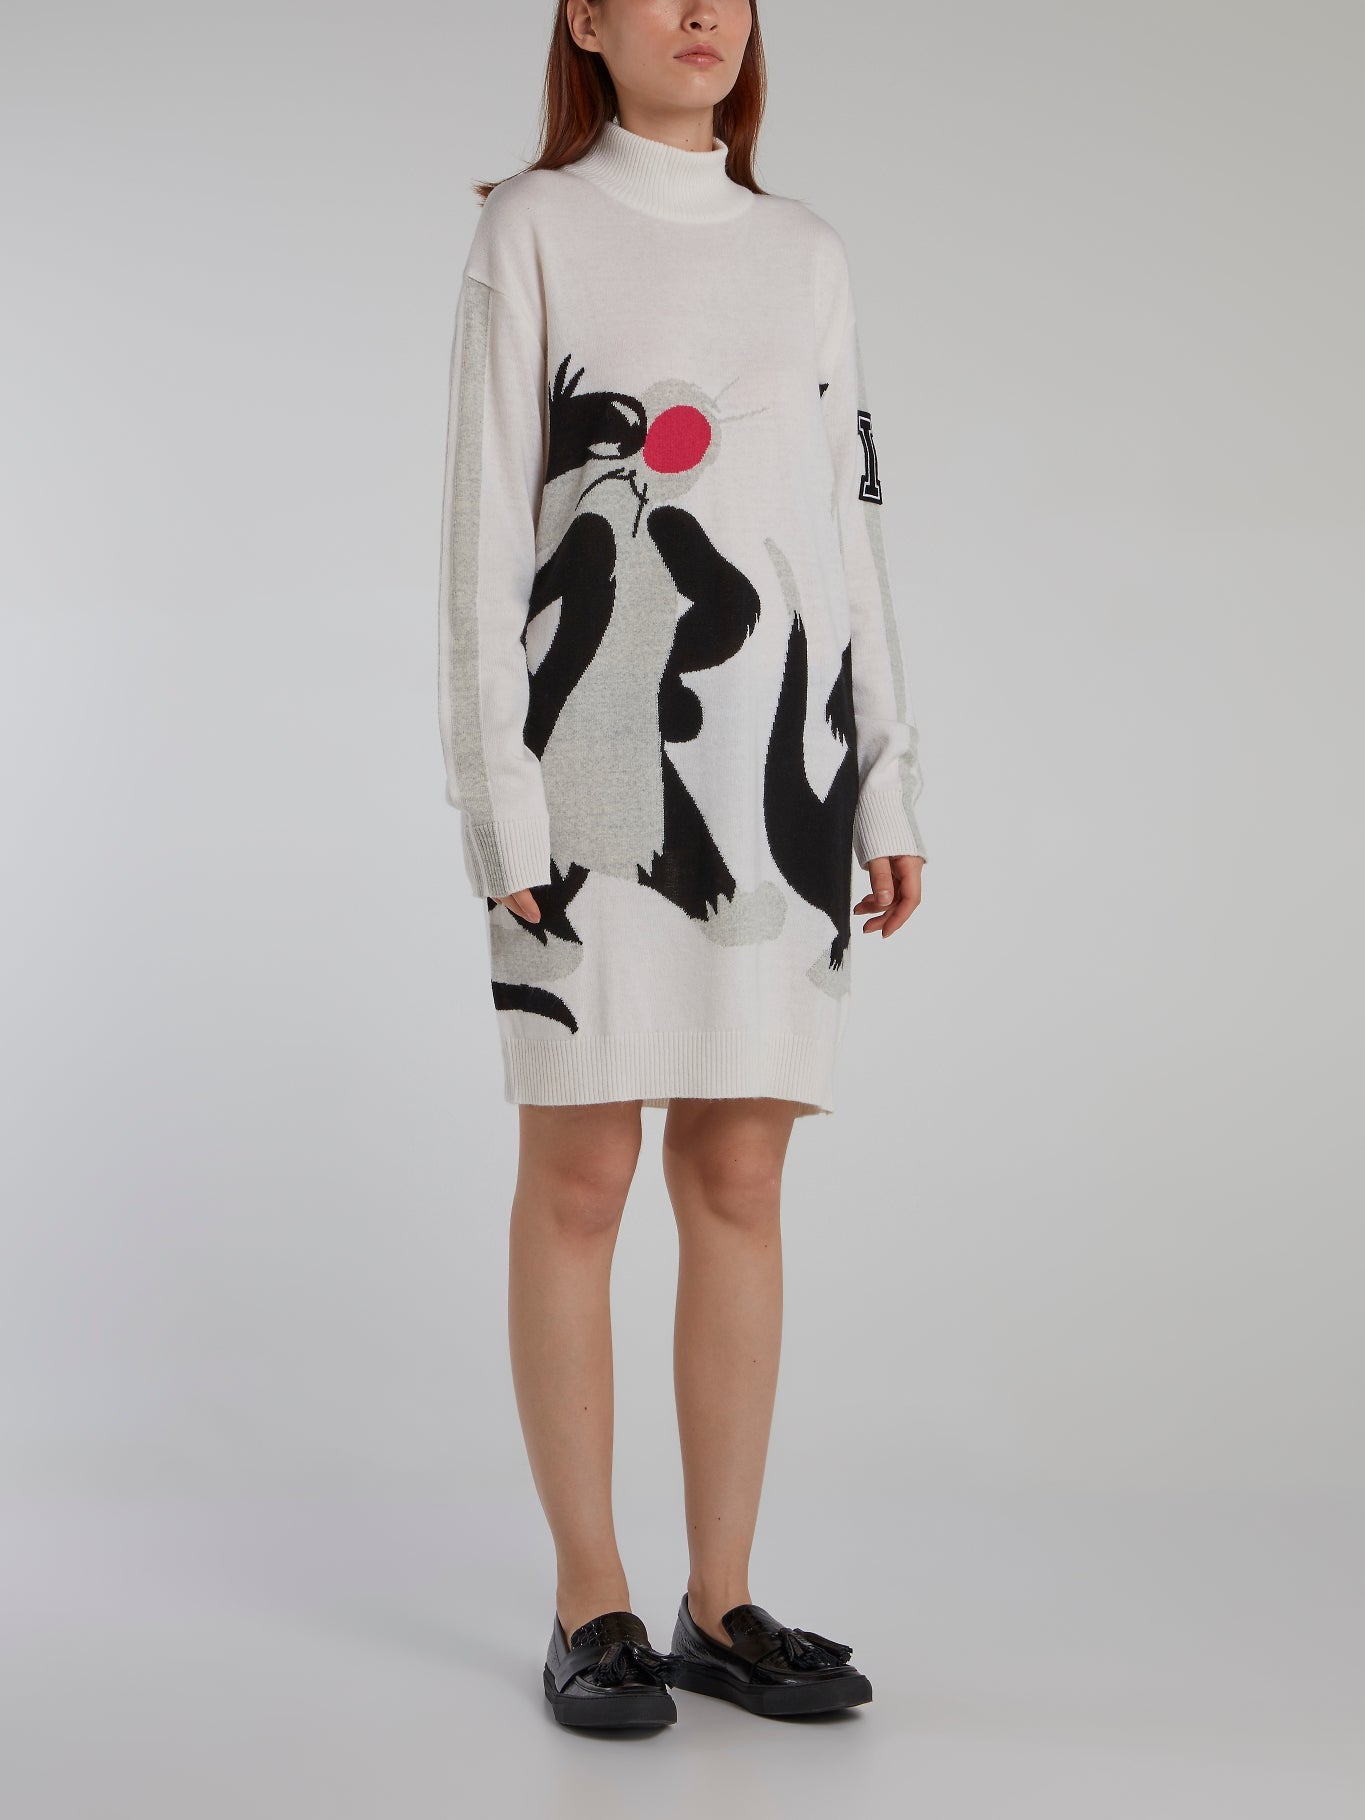 Sylvester The Cat White Sweater Dress